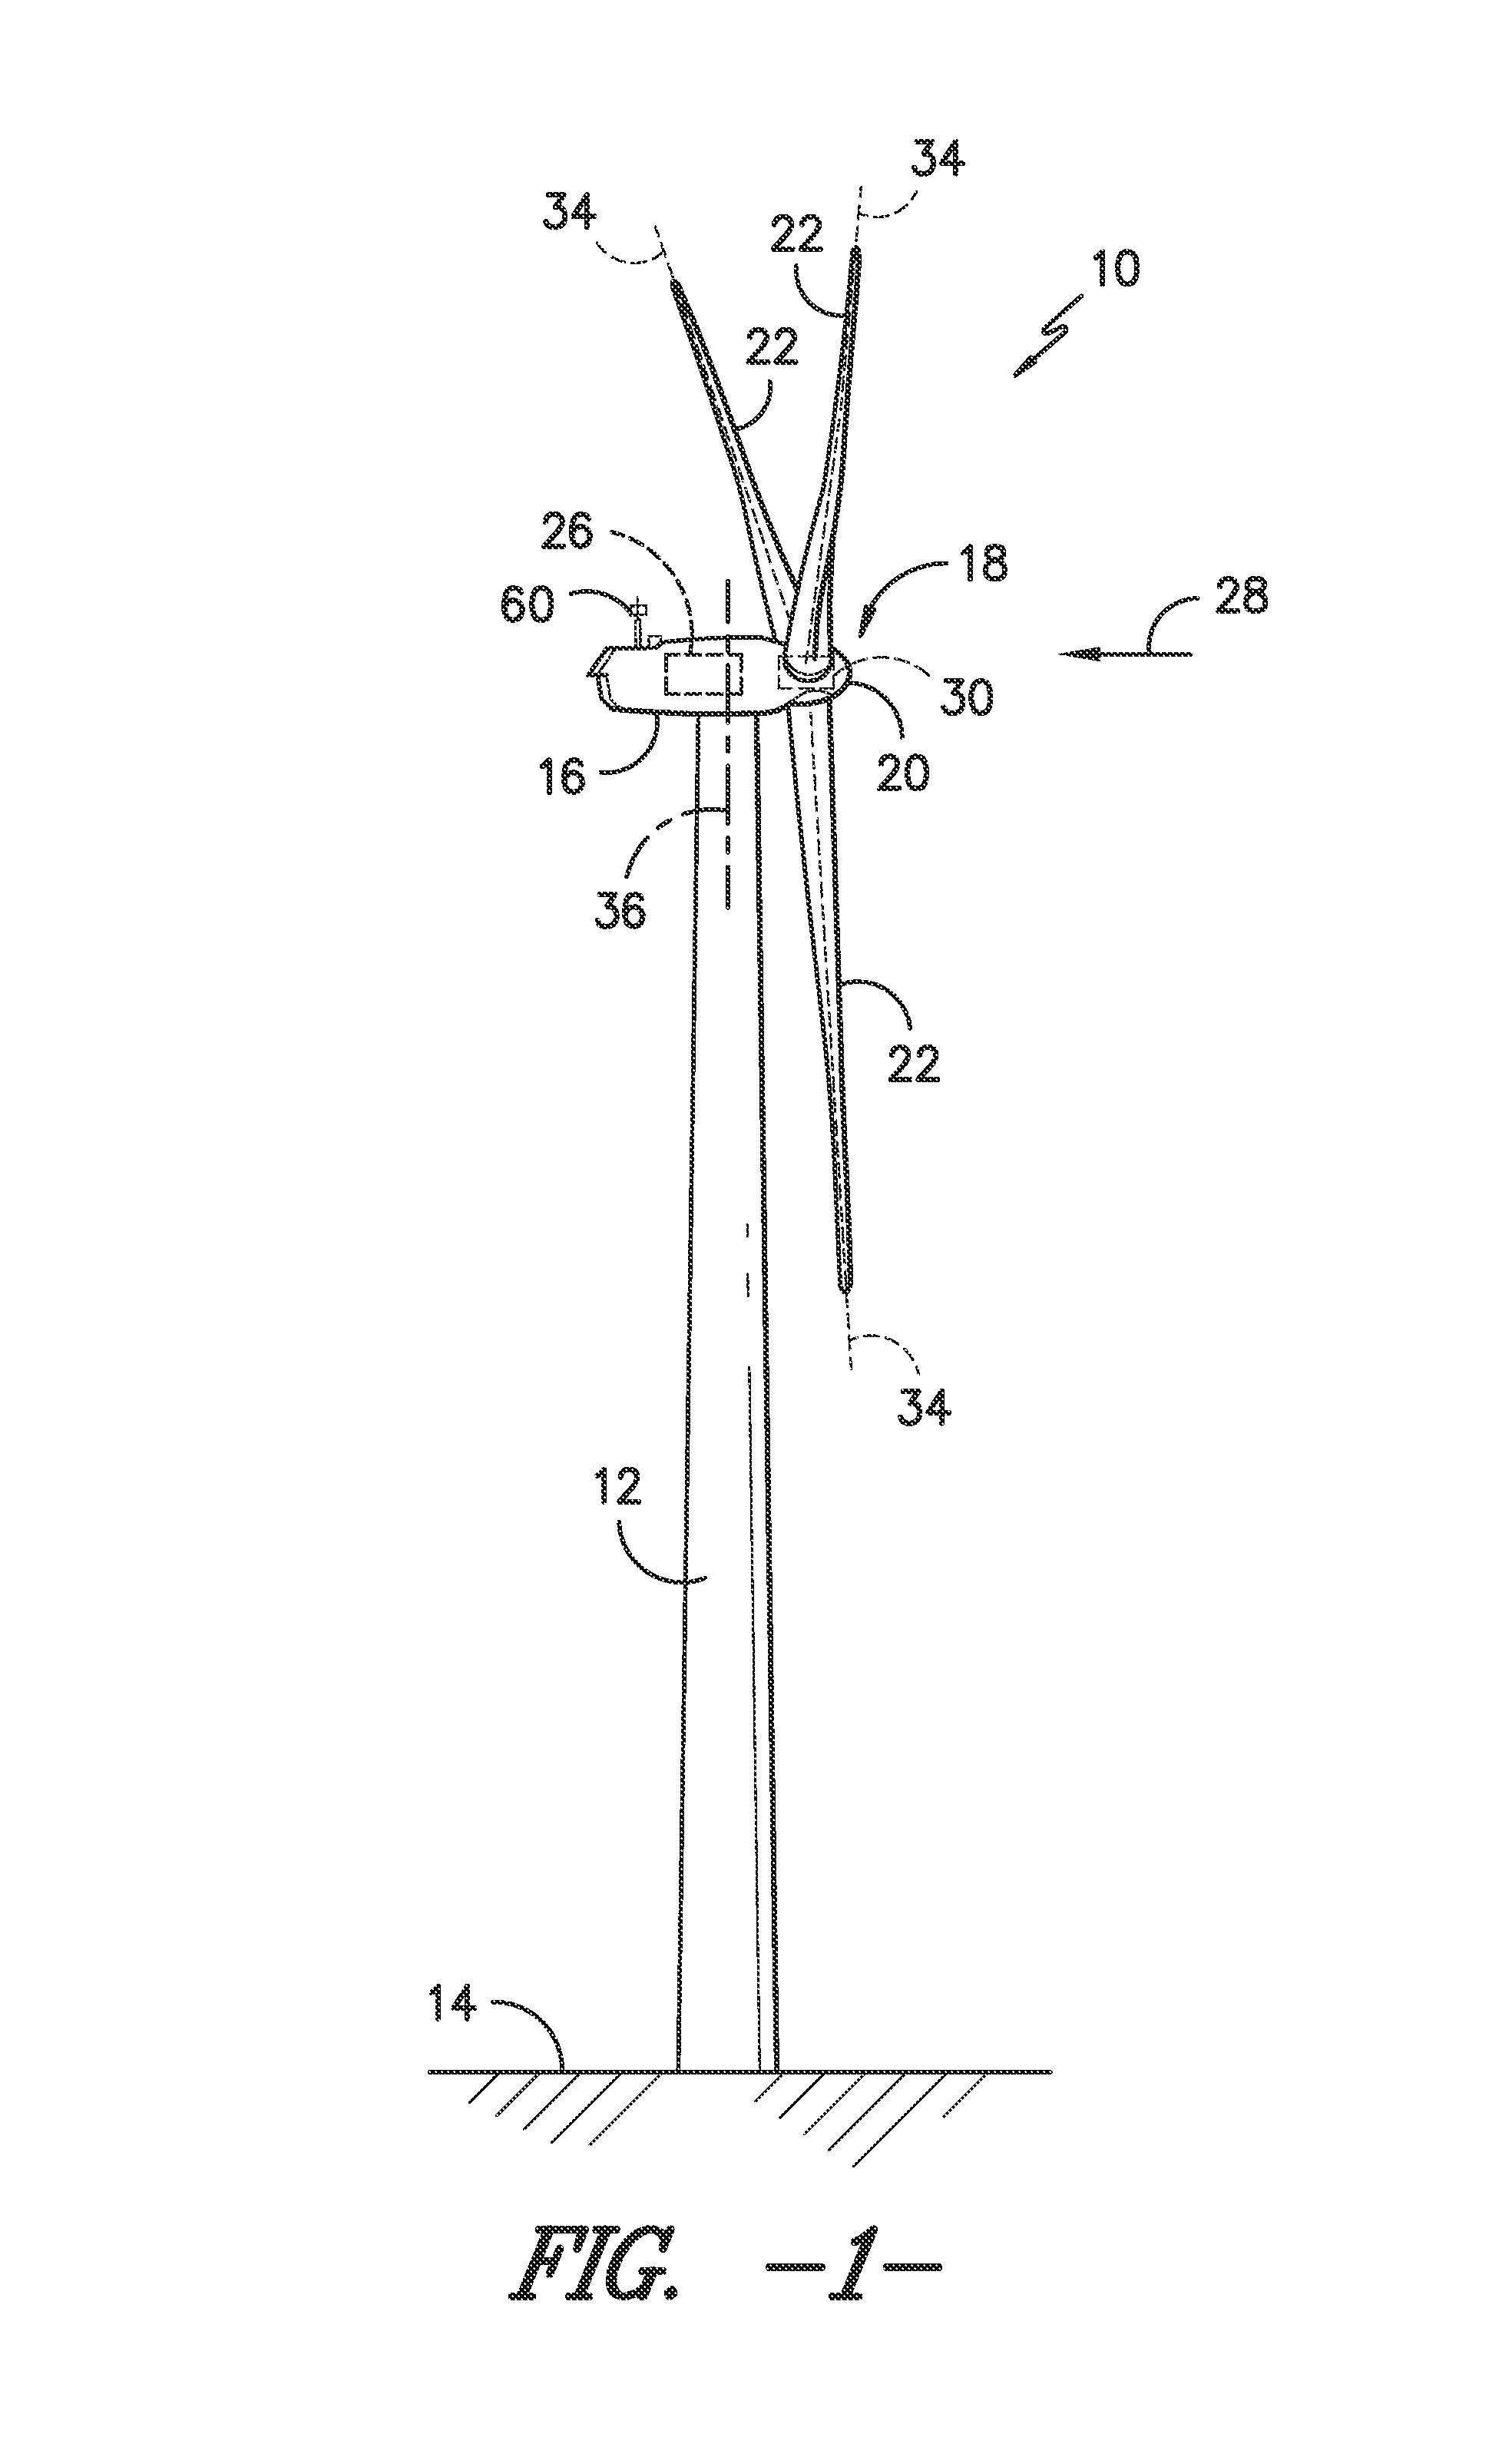 Wind turbines and methods for controlling wind turbine loading